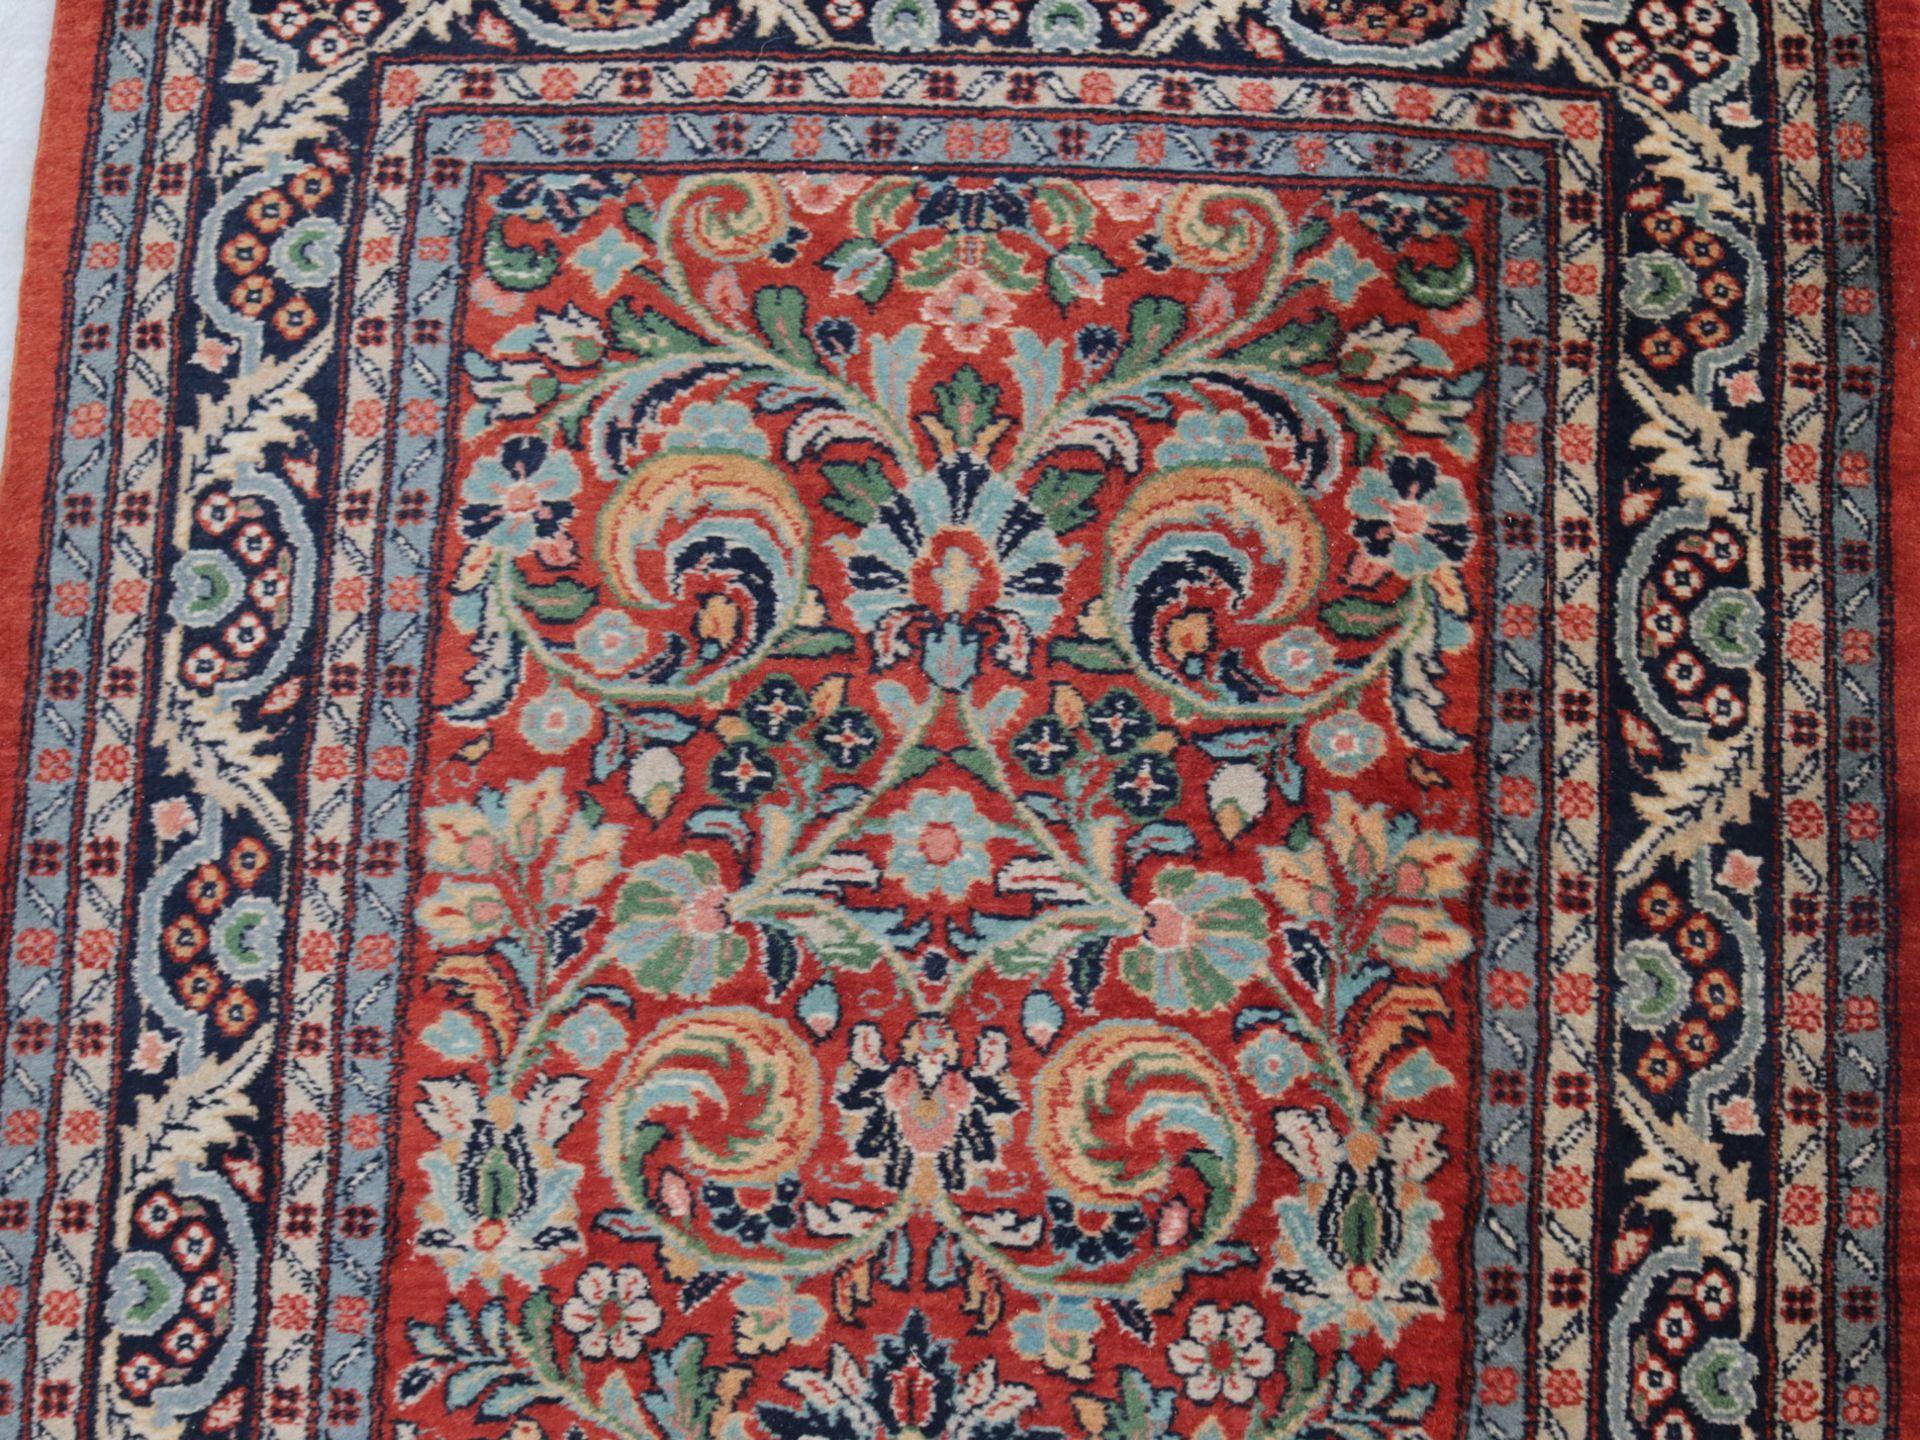 Vintage Oriental Pakistani Wool Rug Runner Red with Floral Ornaments 4